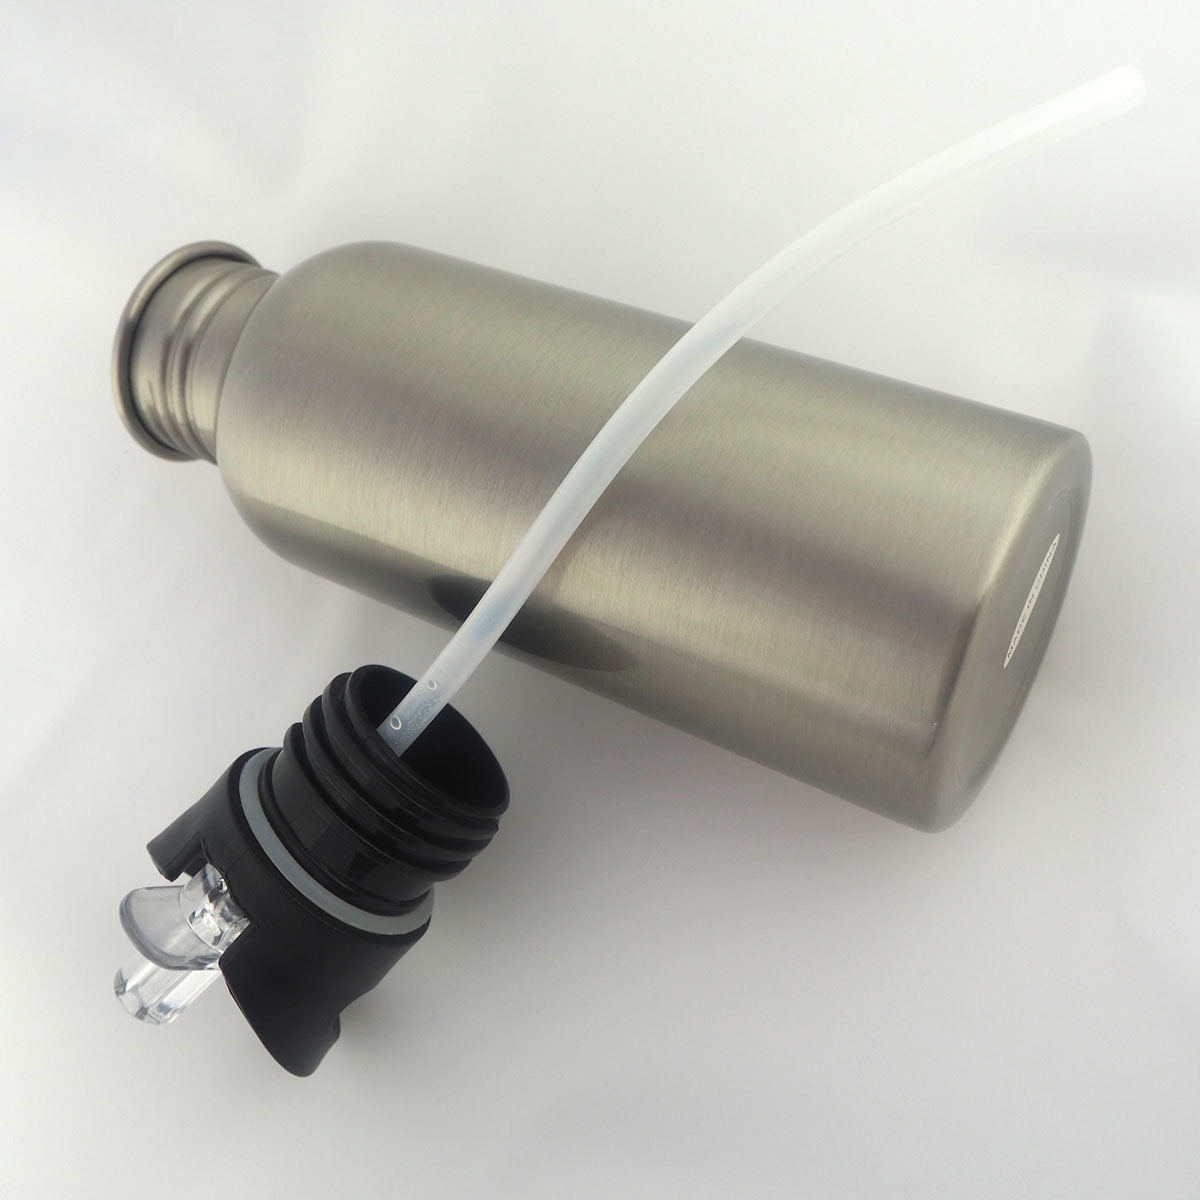 Metal bottle with mouthpiece for sublimation